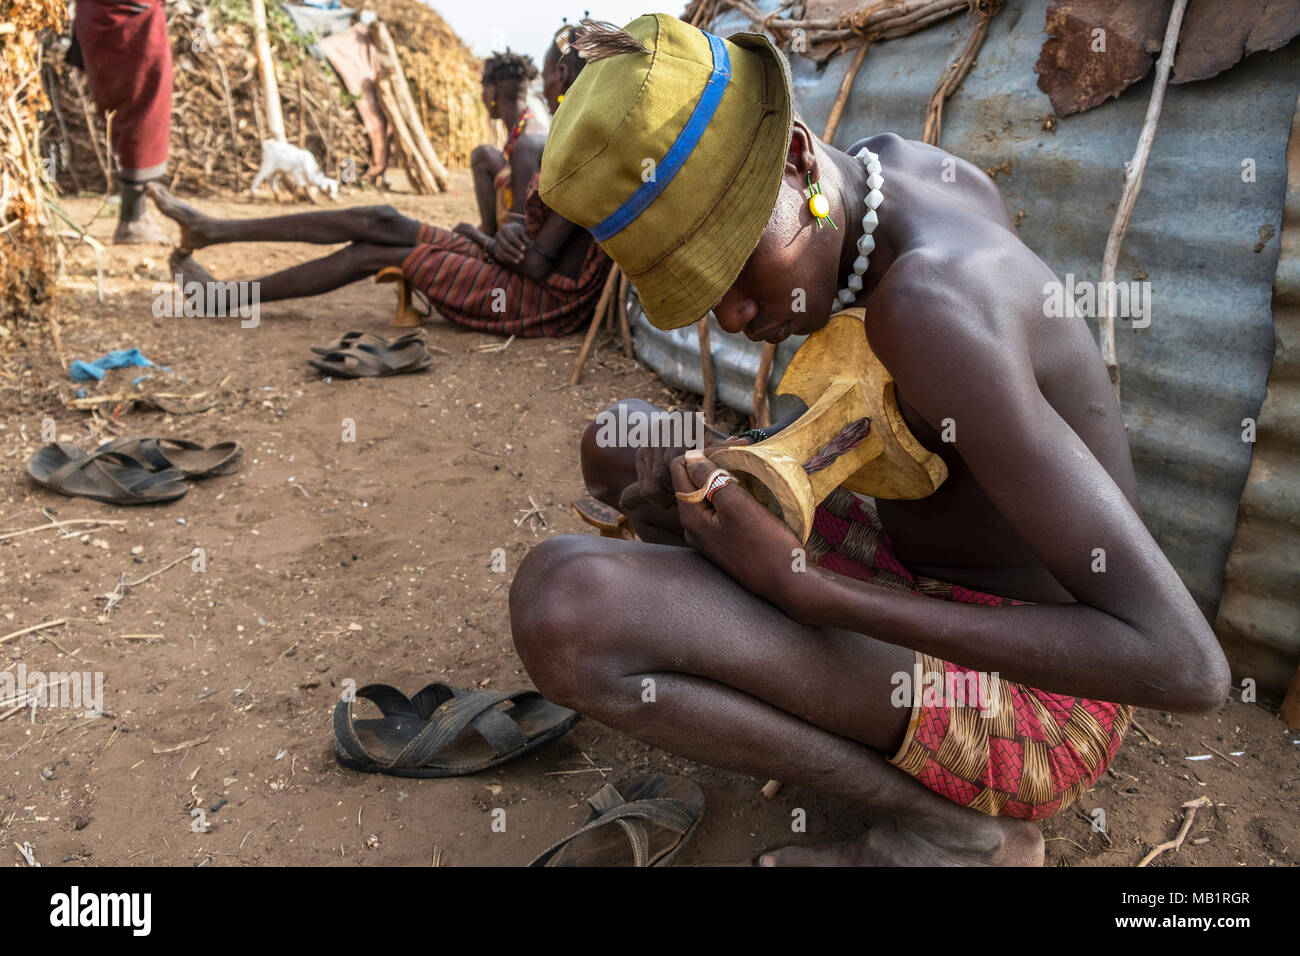 Omorate, Ethiopia - January 25, 2018: Unidentified men from the Dassanech tribe making chairs in their village in Omorate, Ethiopia. Stock Photo